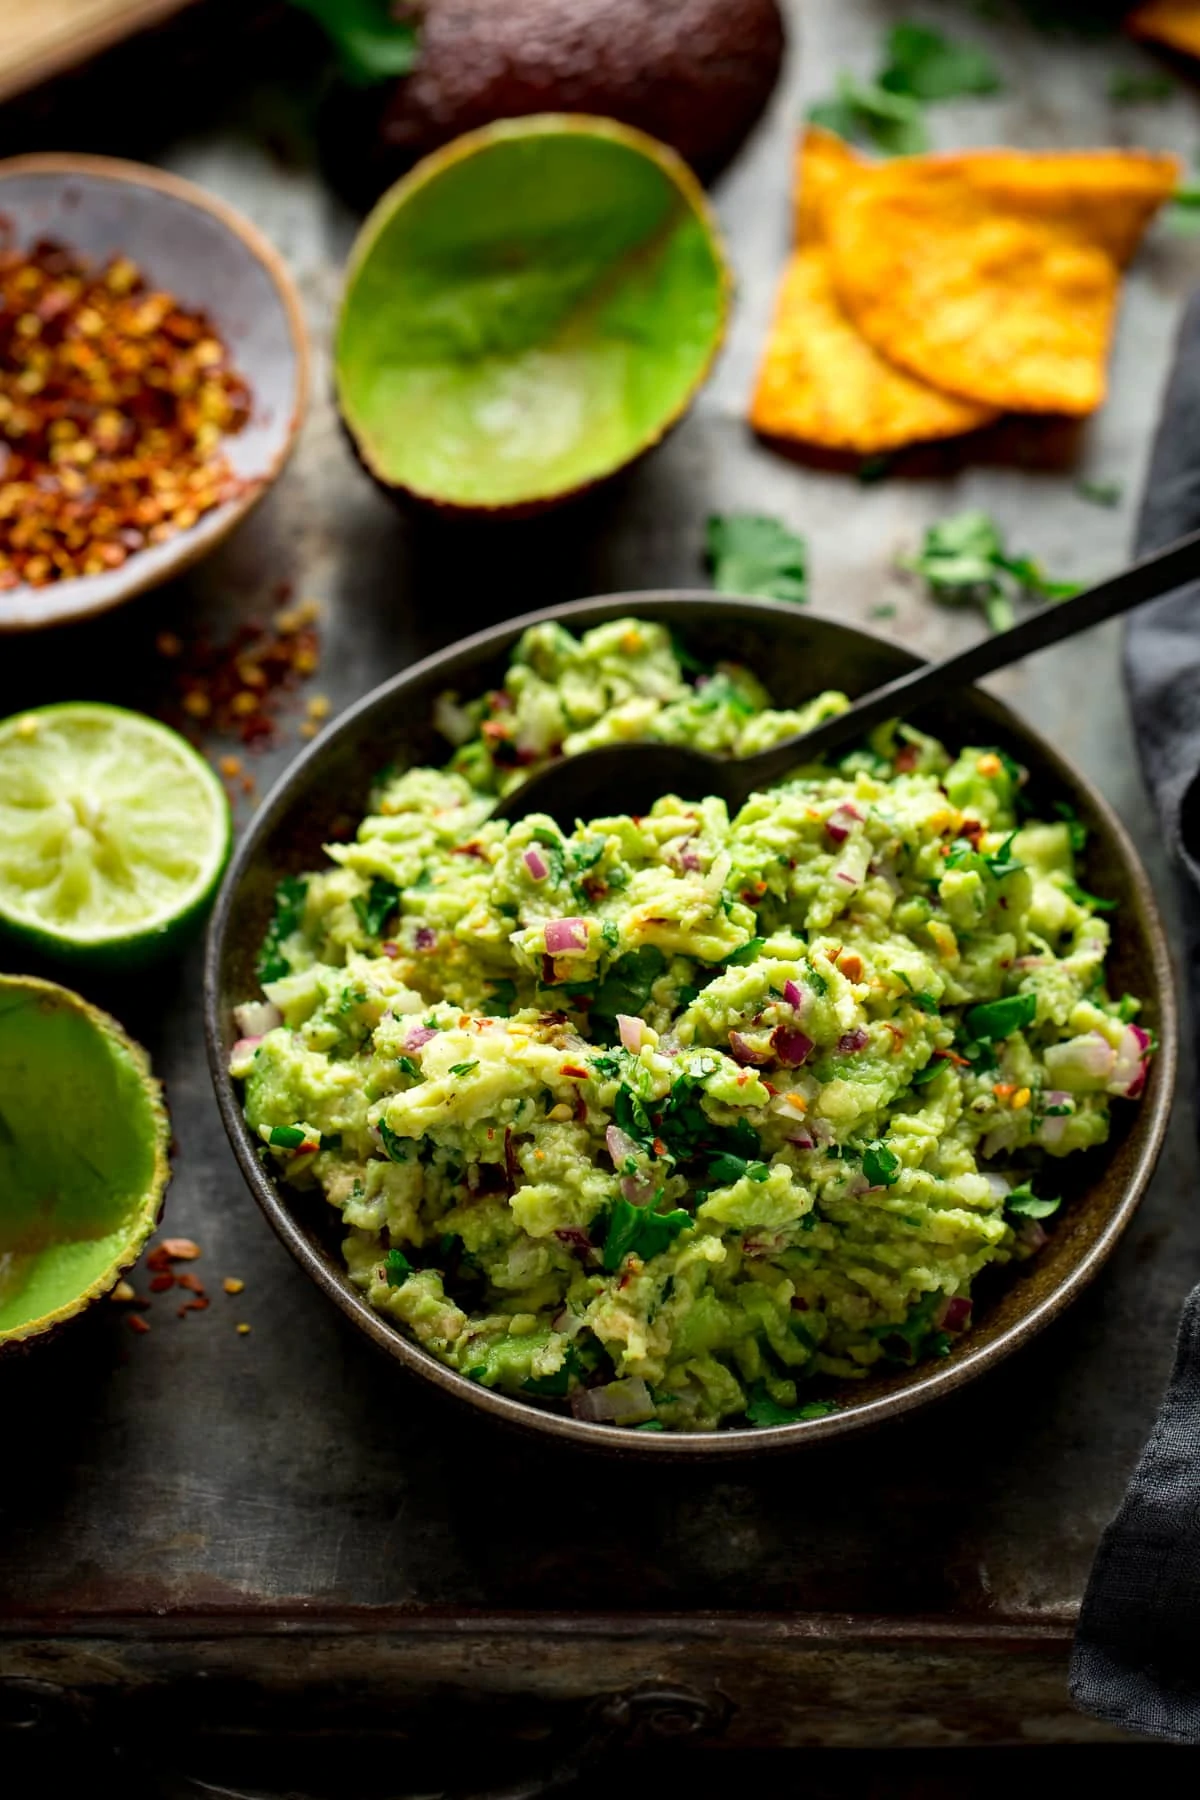 Spicy Guacamole Recipe - Spice Up The Curry